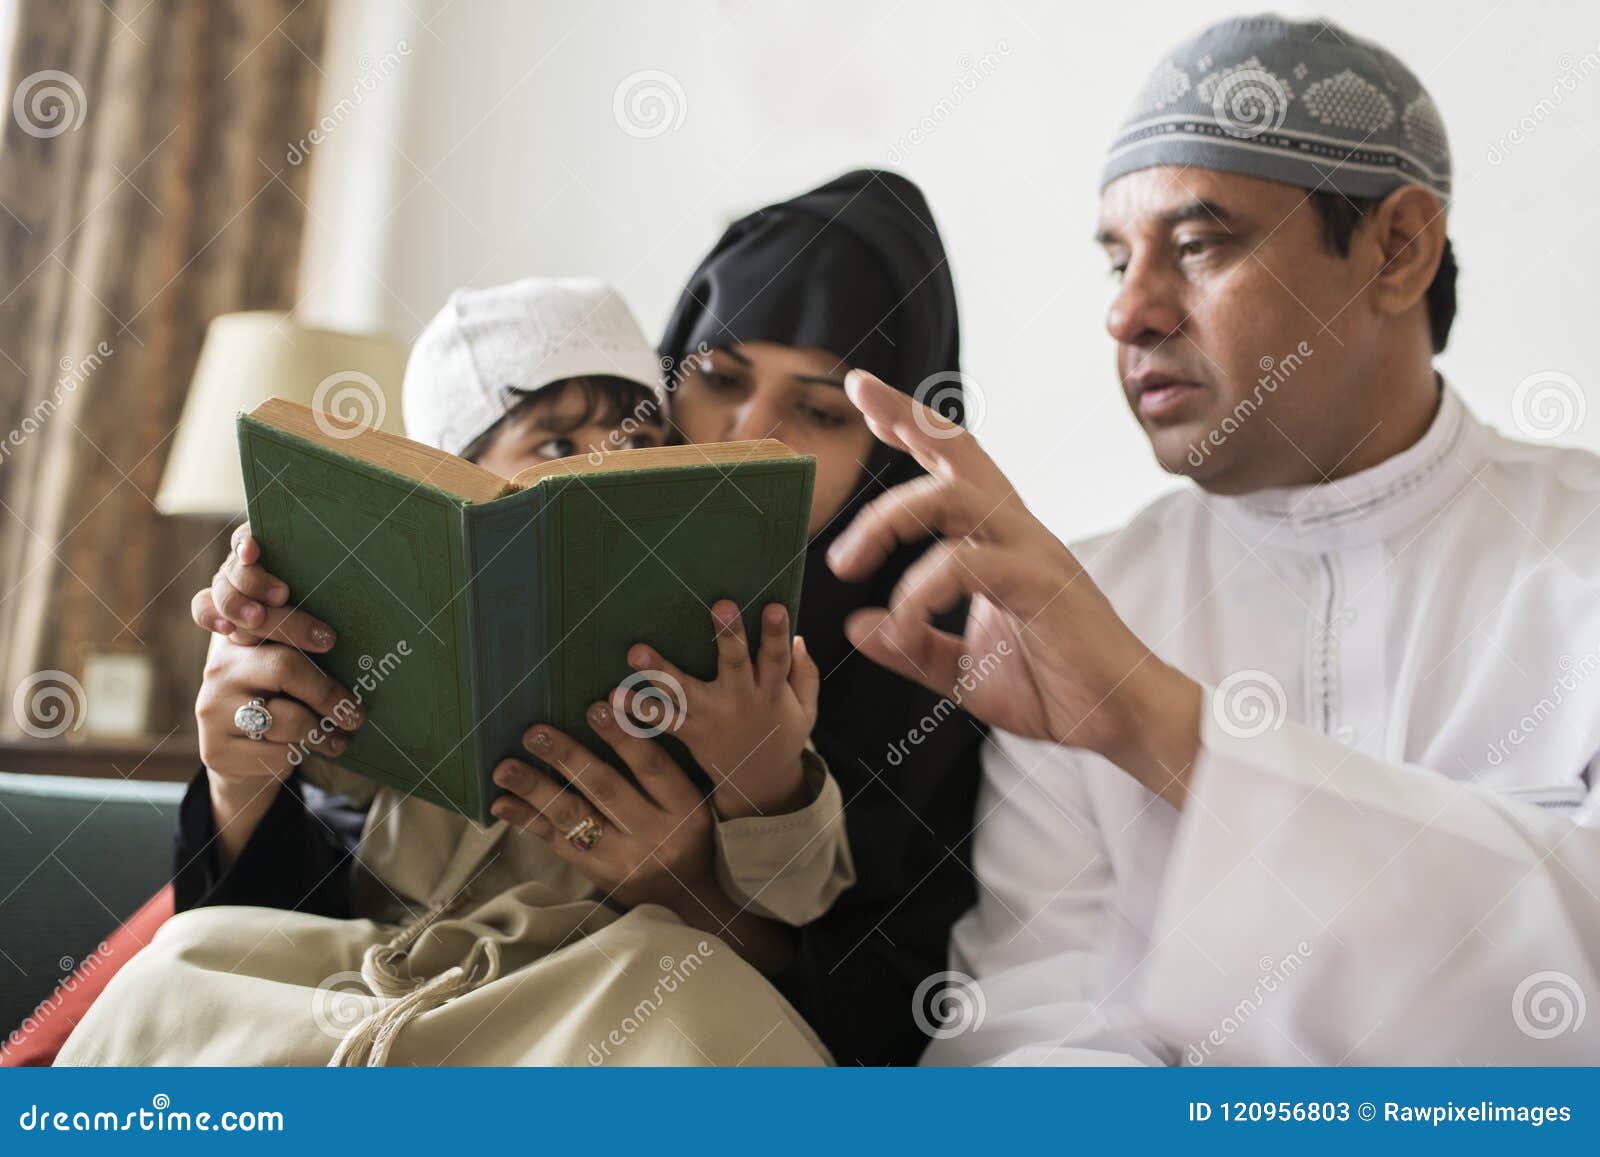 muslims family reading the quran together at home